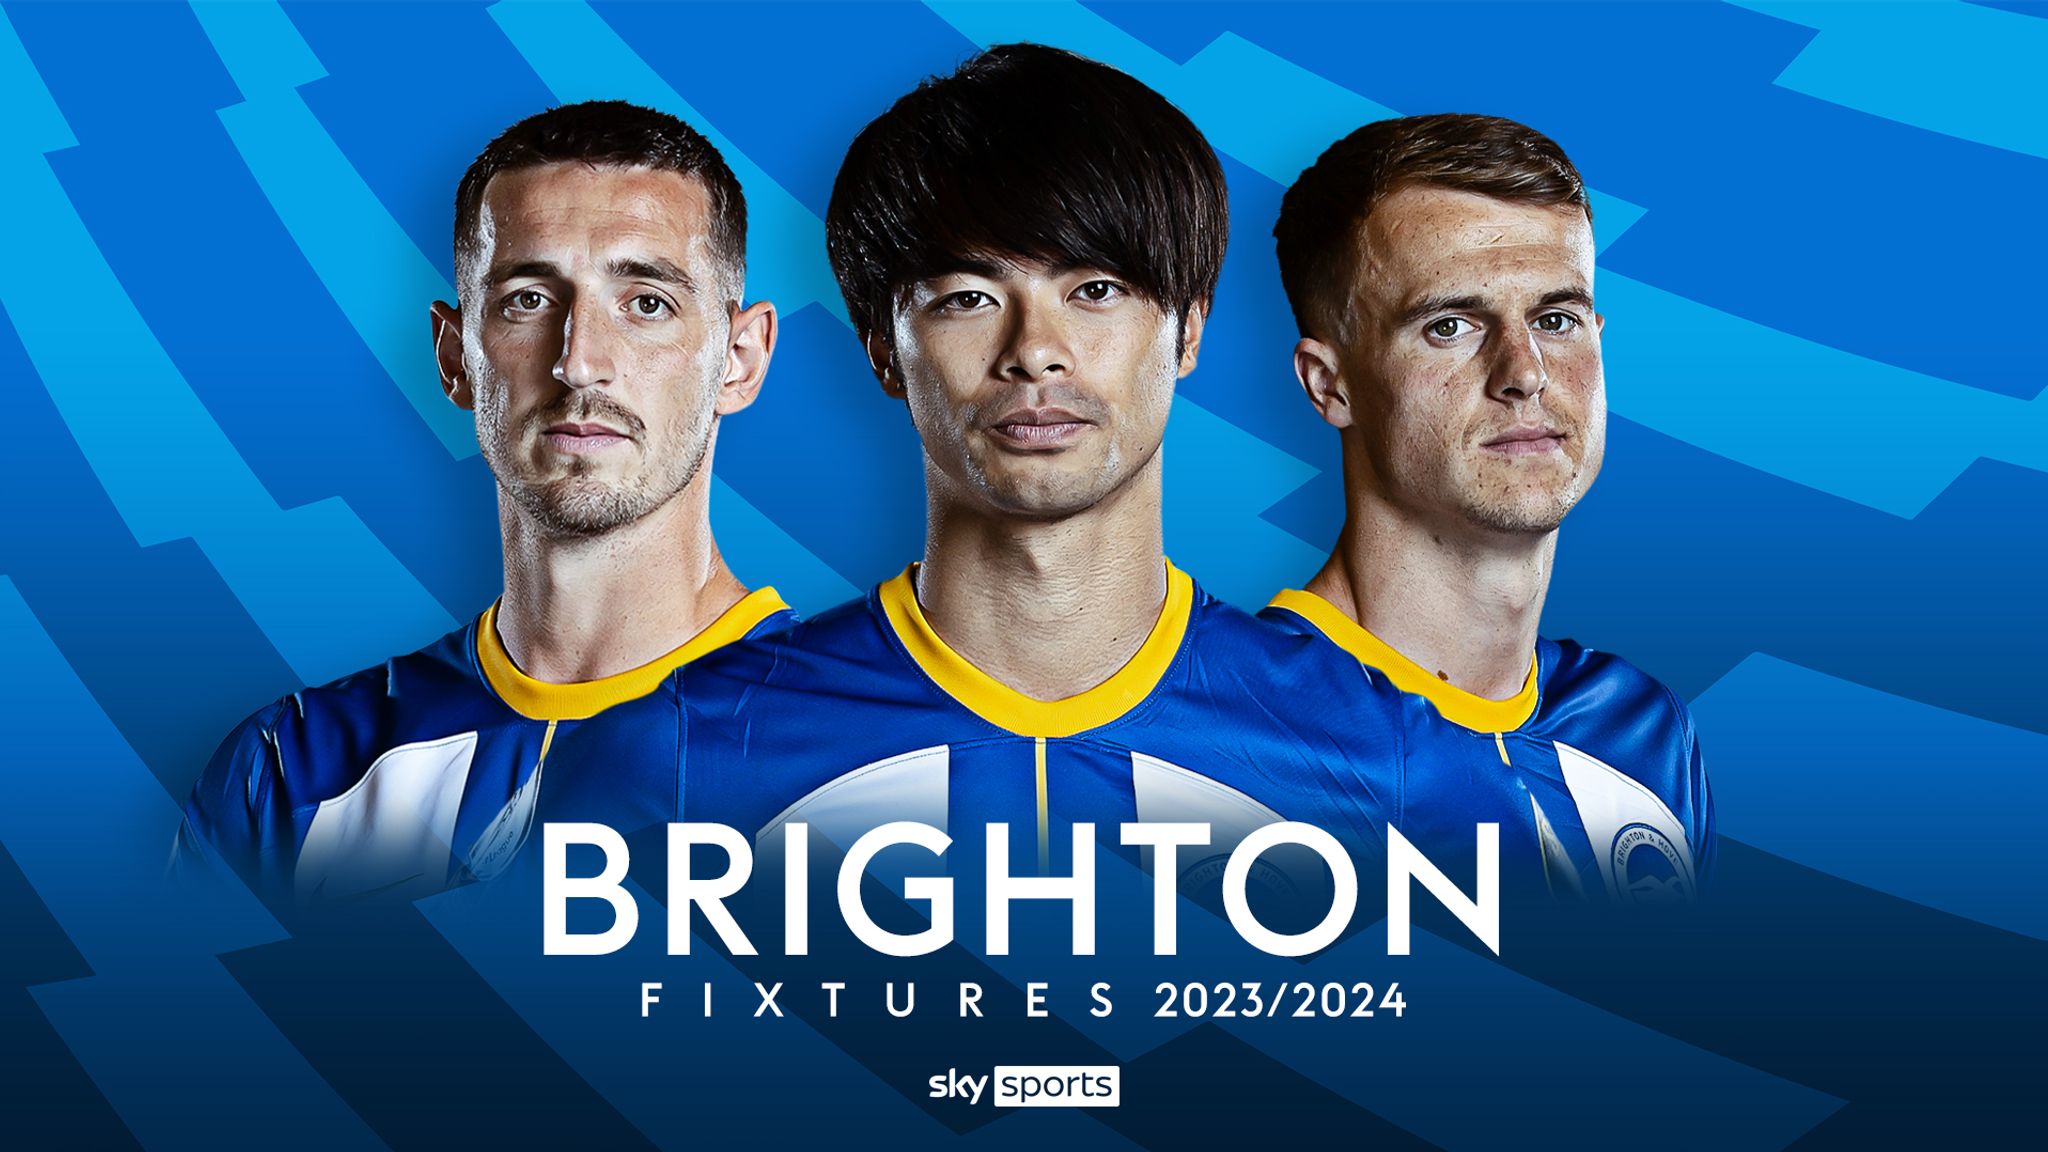 Brighton Premier League 2023/24 fixtures and schedule Football News